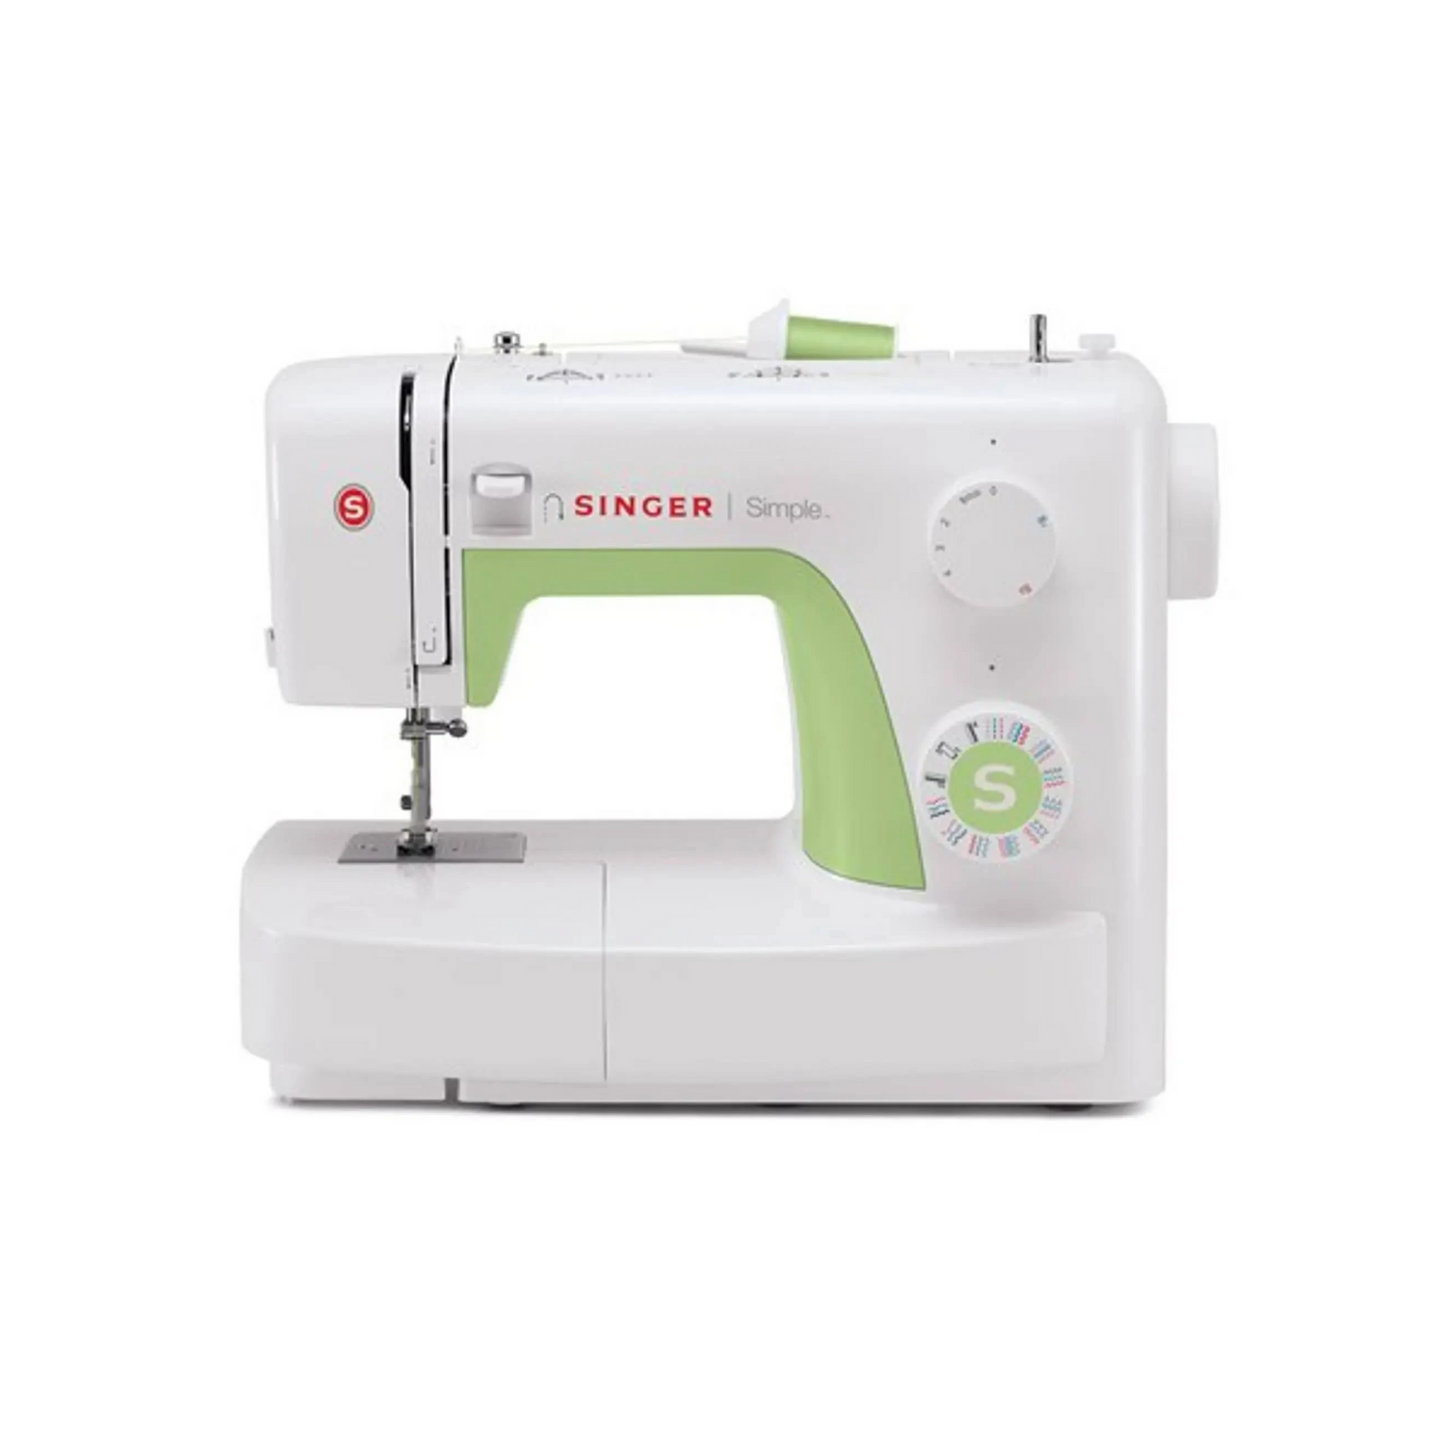 Singer simple 3229 automatic zig-zag electric - Sewing machine - White - green -  Front view